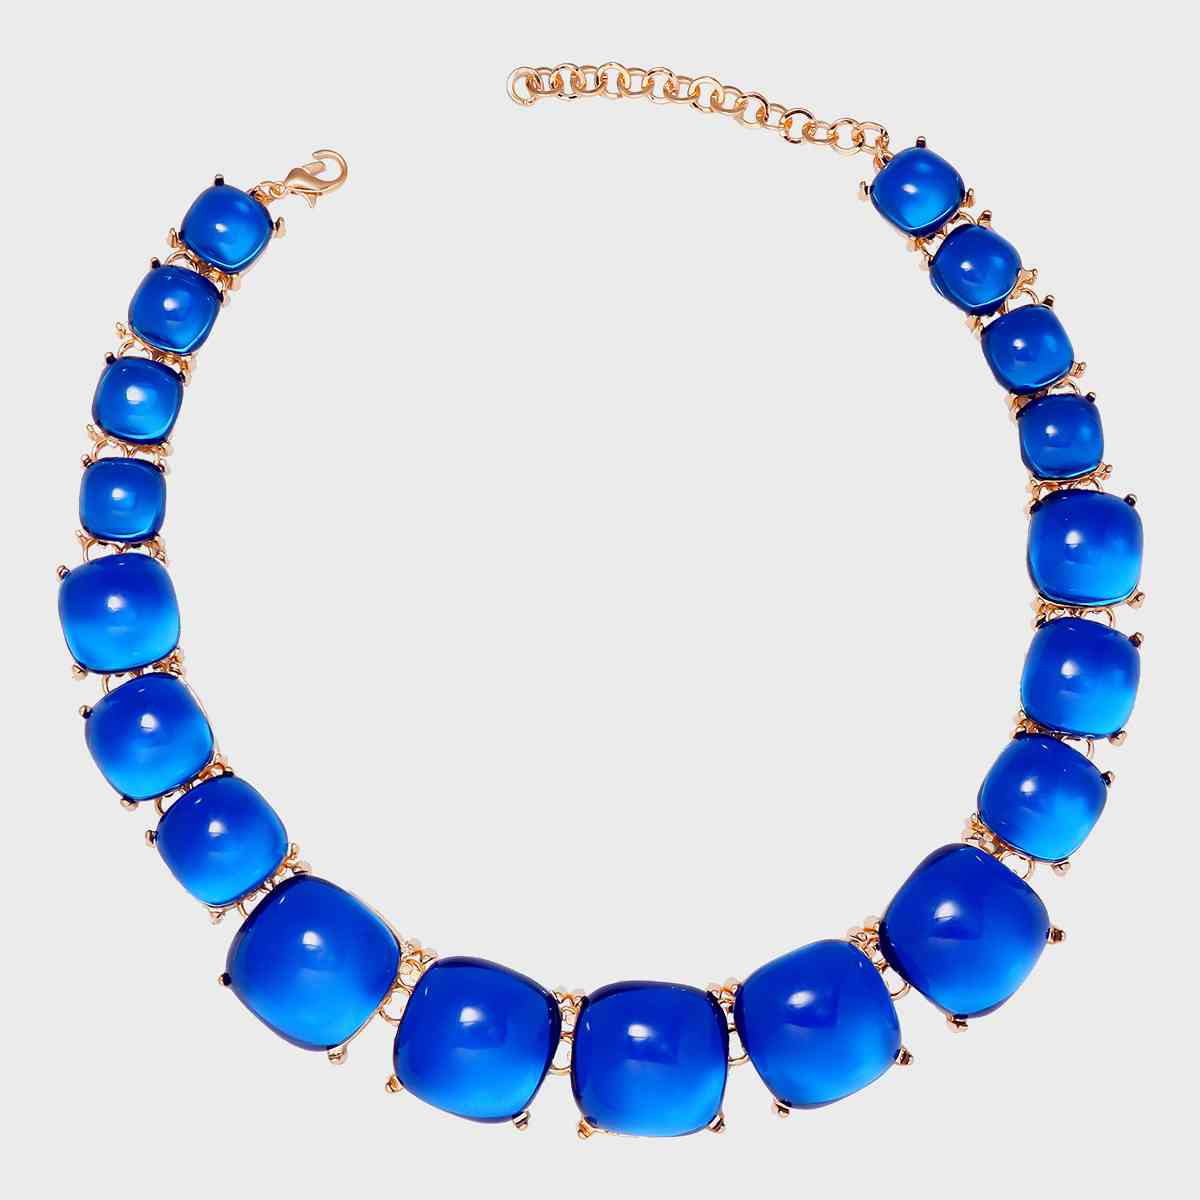 Retro Graduated Rhinestone Riviere Necklace in 7 Color Choices